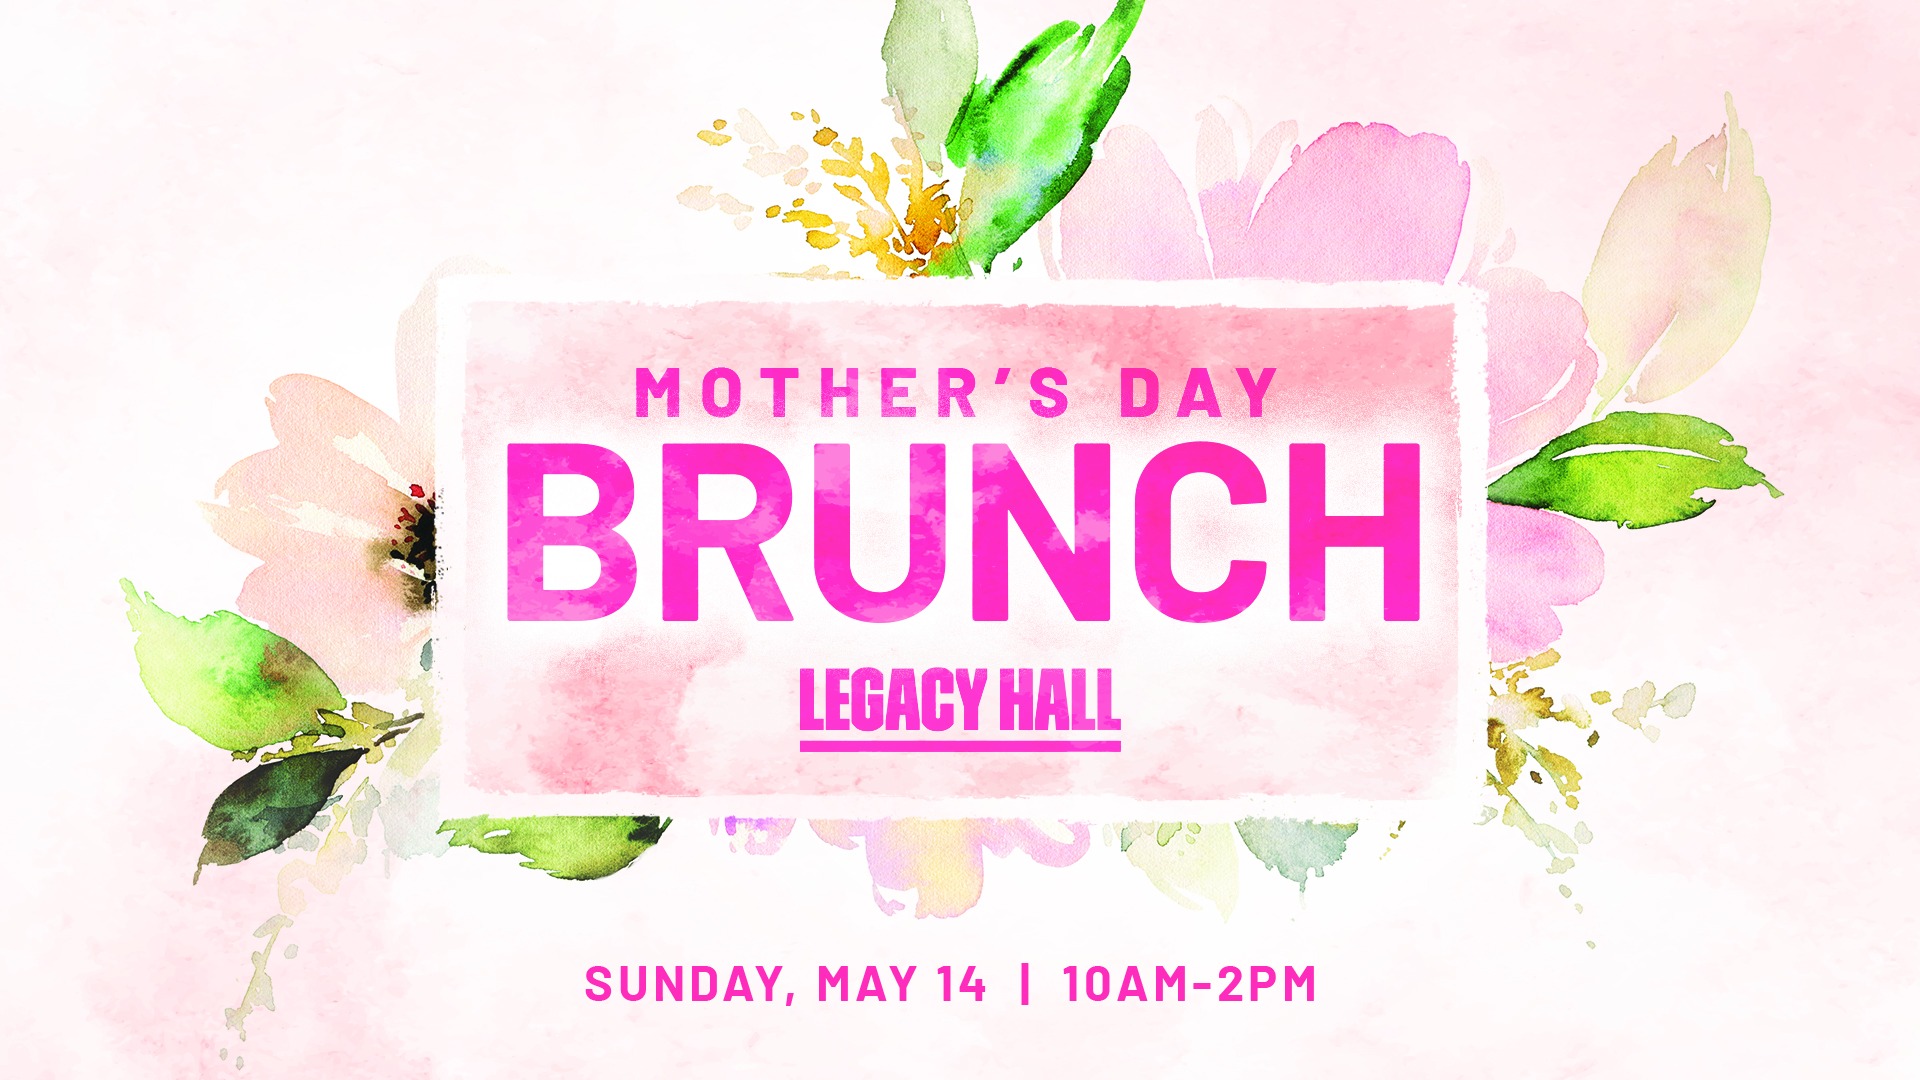 Mother's Day Brunch at Legacy Hall